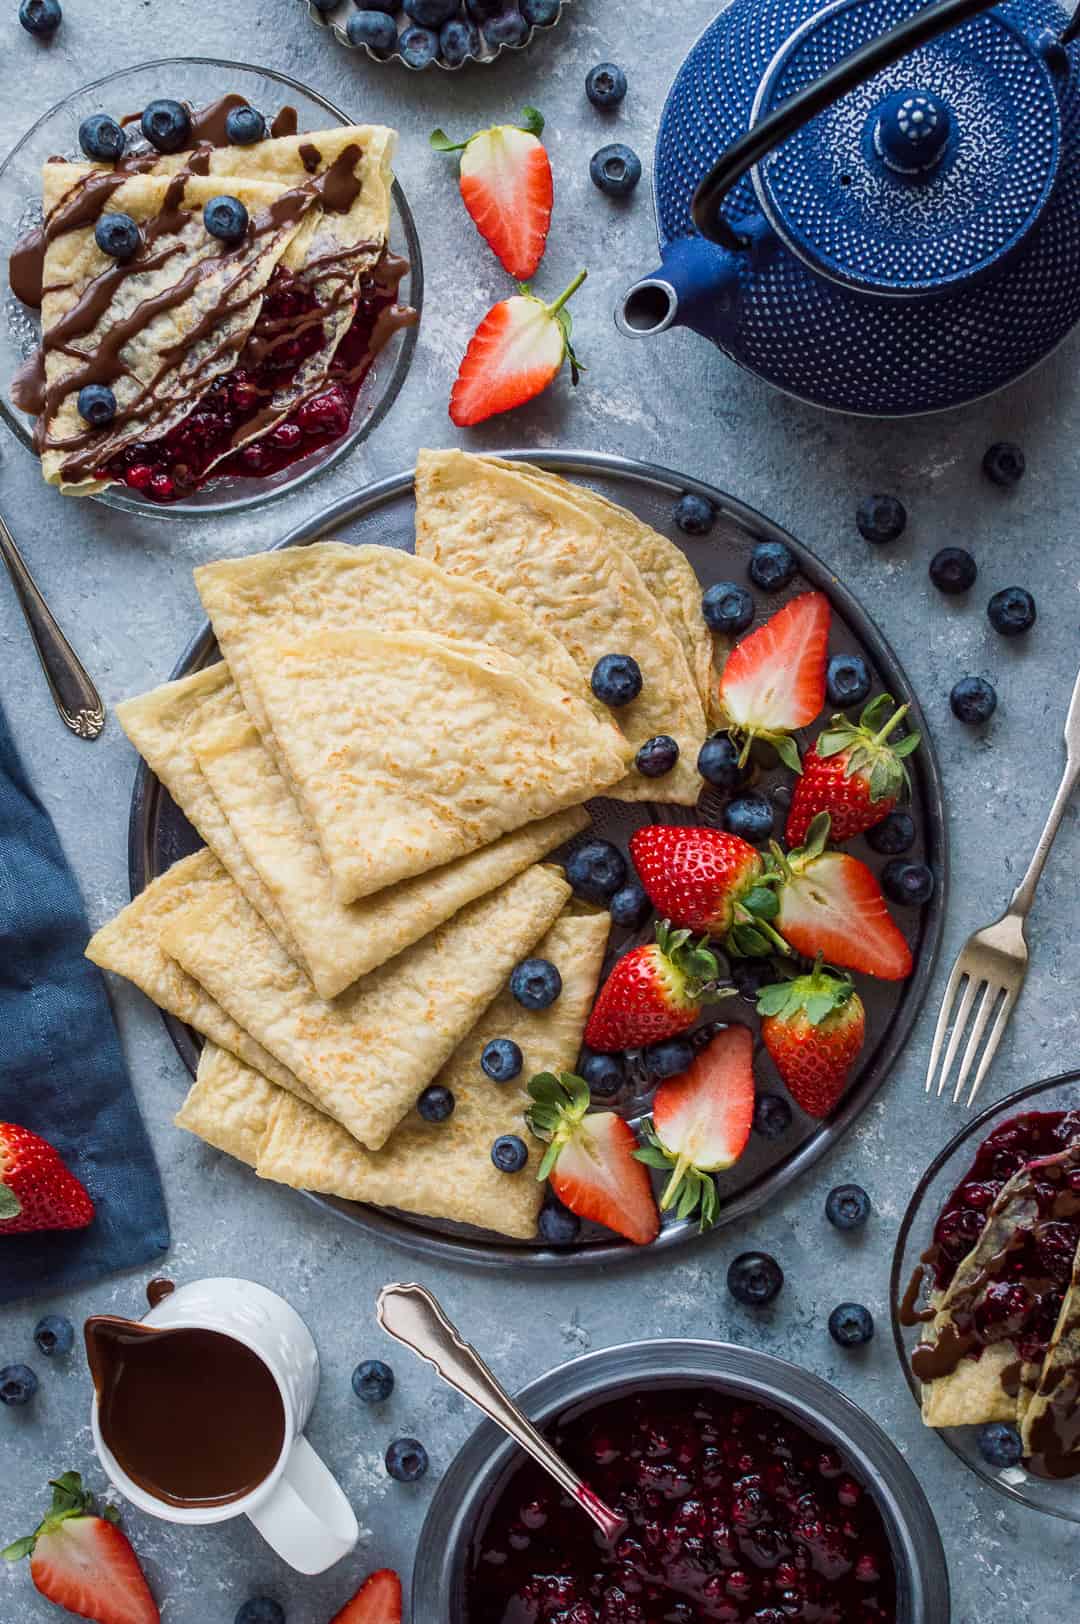 Top down shot of a breakfast spread of vegan pancakes with berries, chocolate sauce and berry compote.